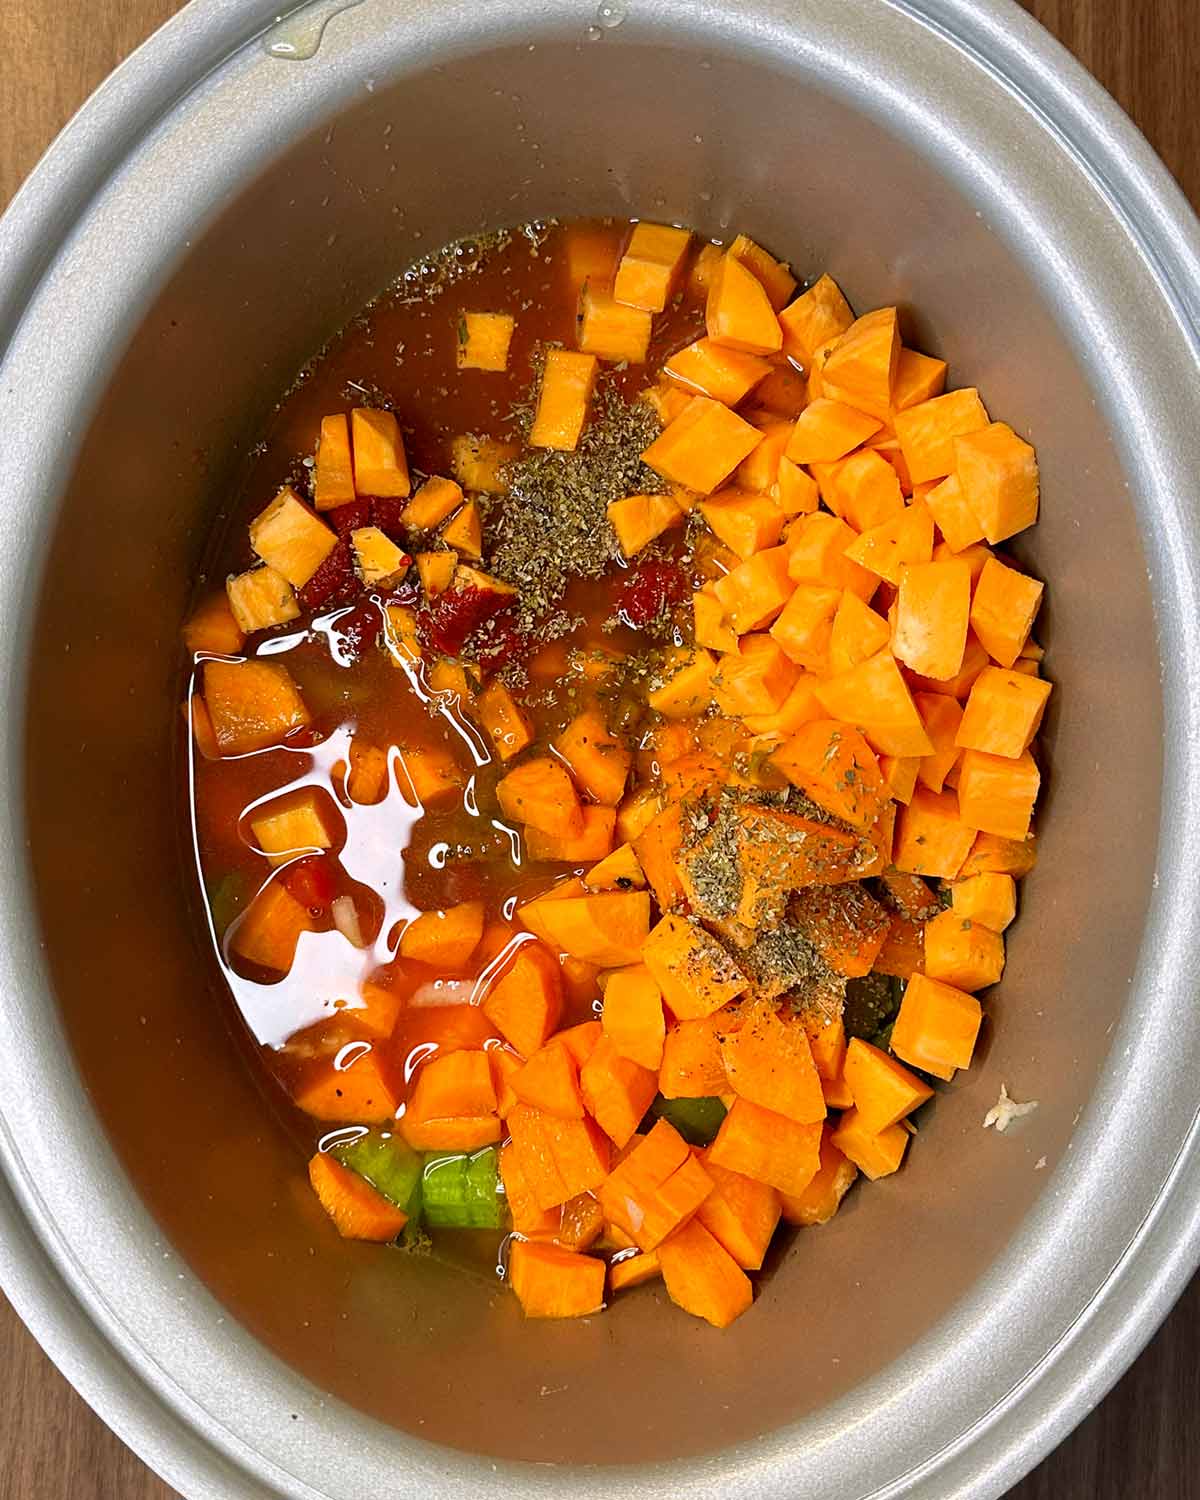 Chopped vegetables, tomatoes, stock and seasoning in a slow cooker bowl.